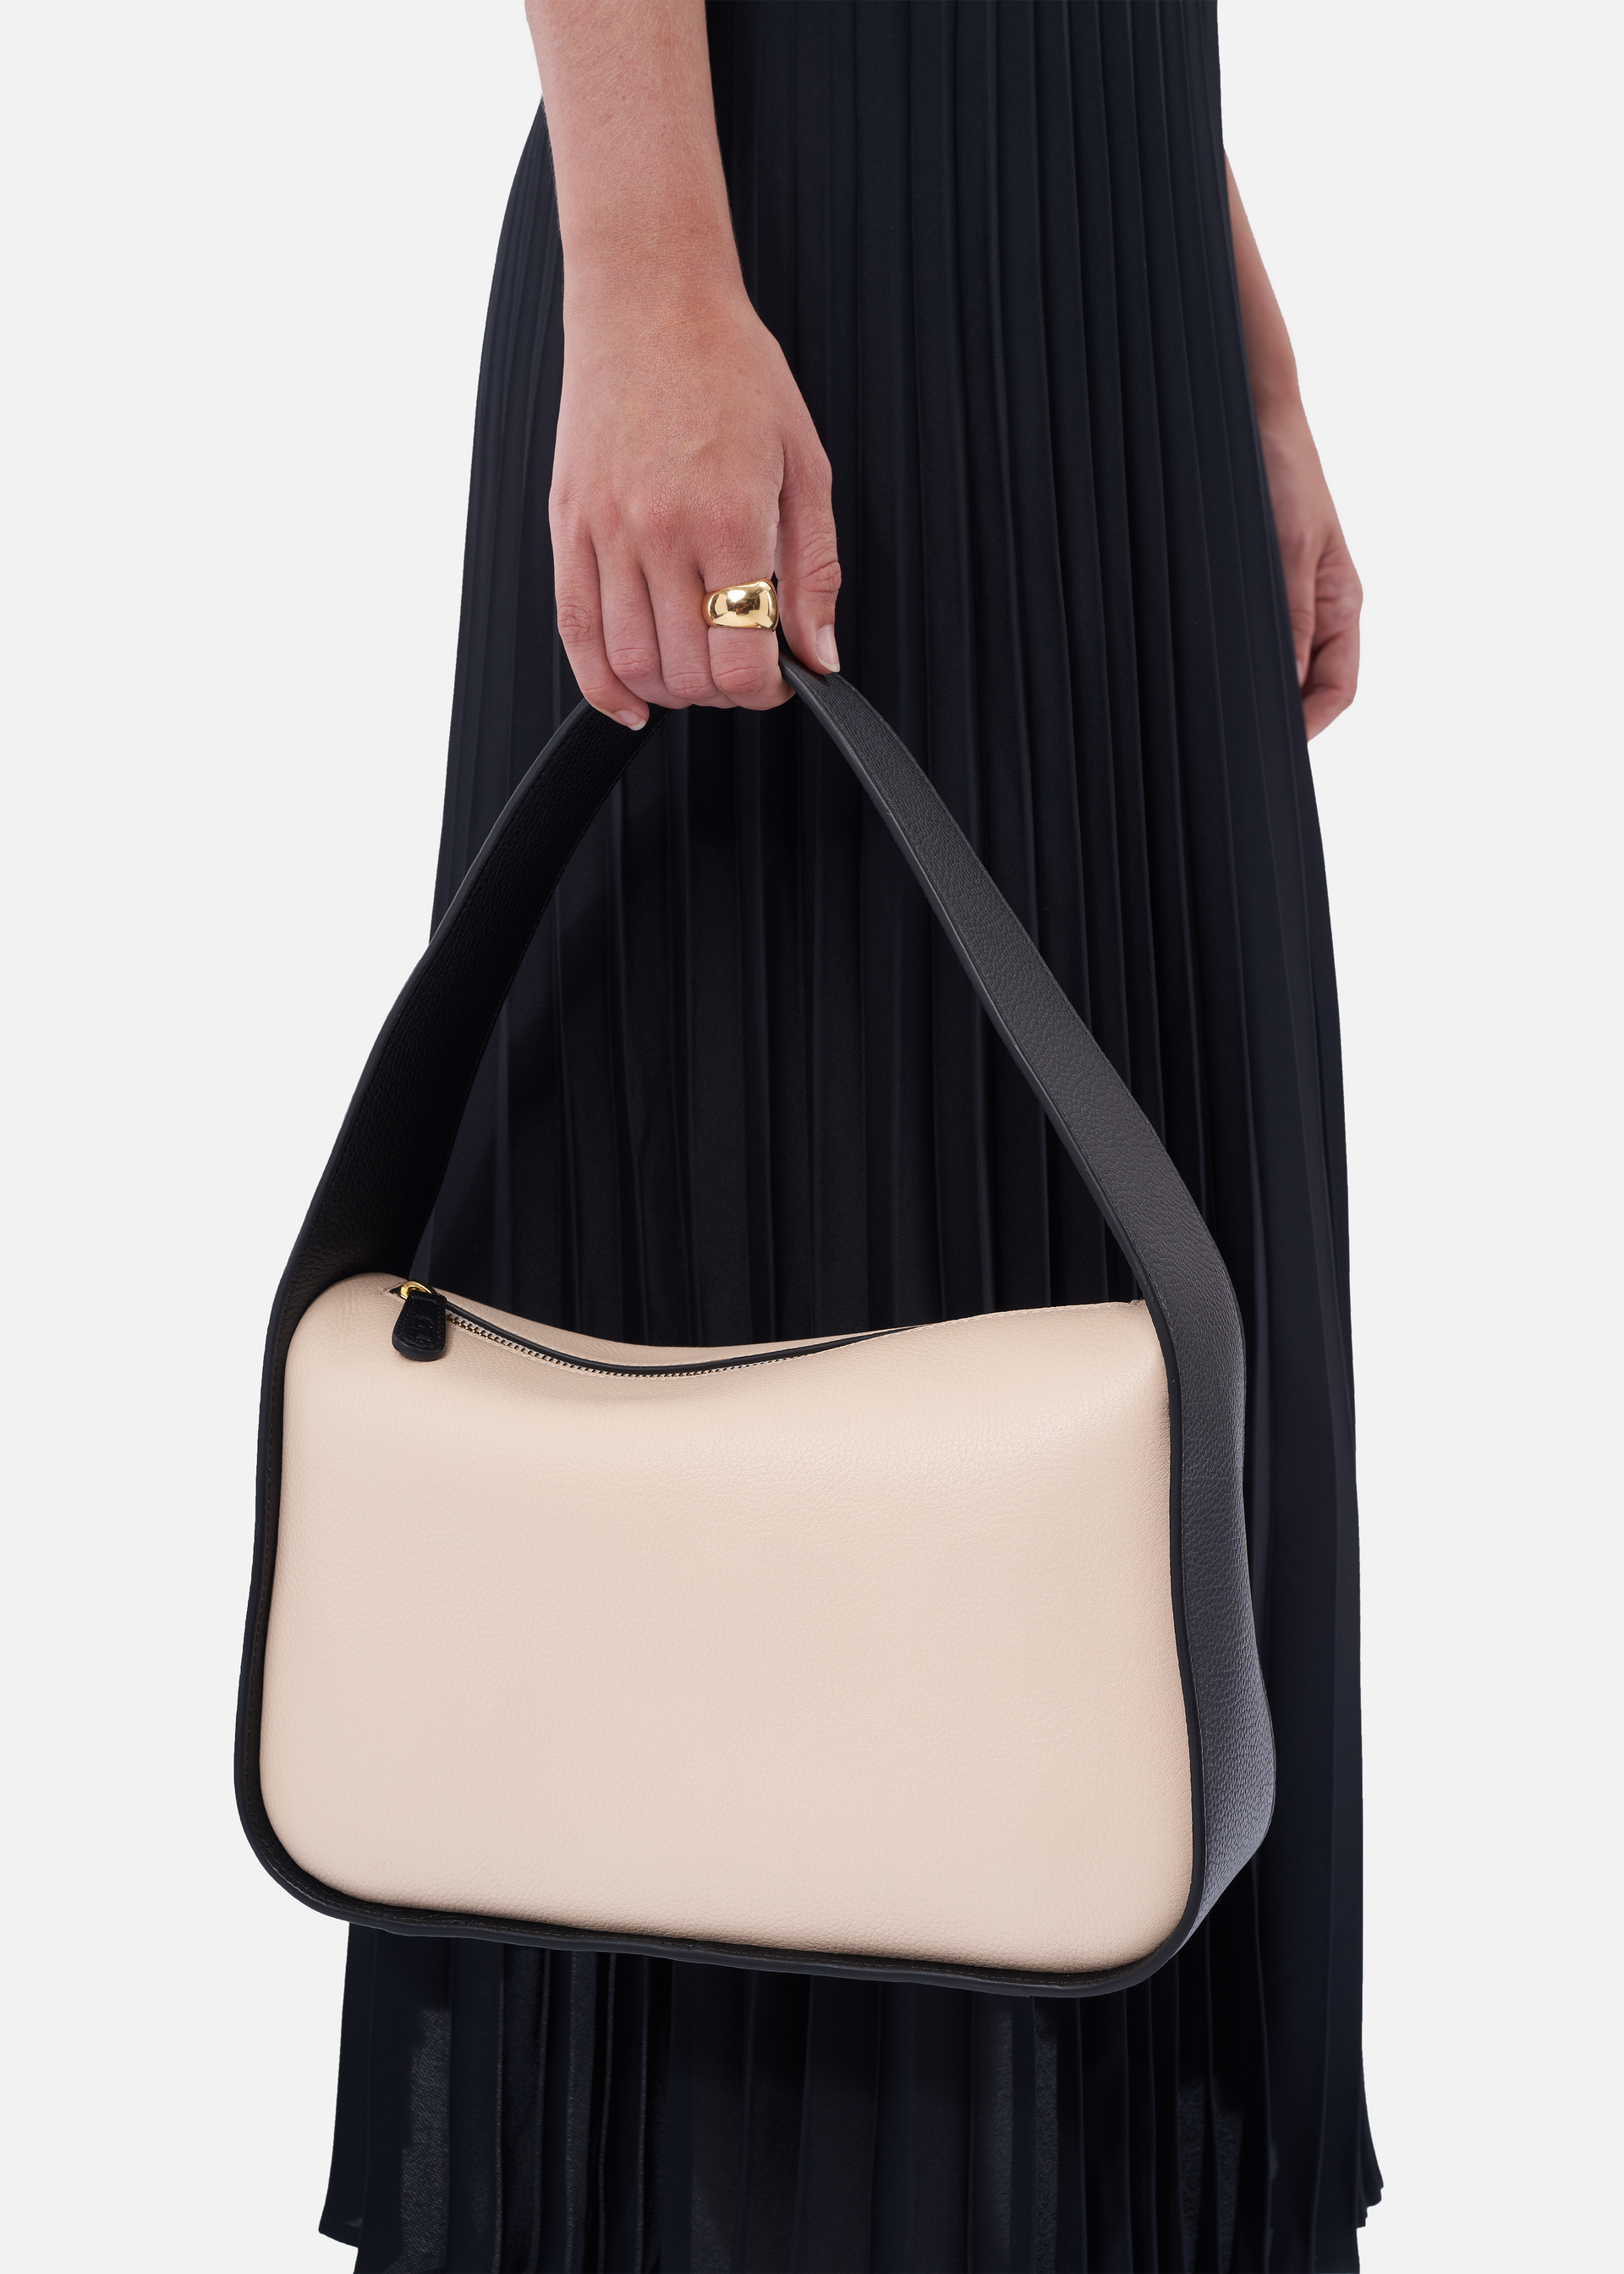 Grete pebble leather shoulder bag in bare / black with black edge paint